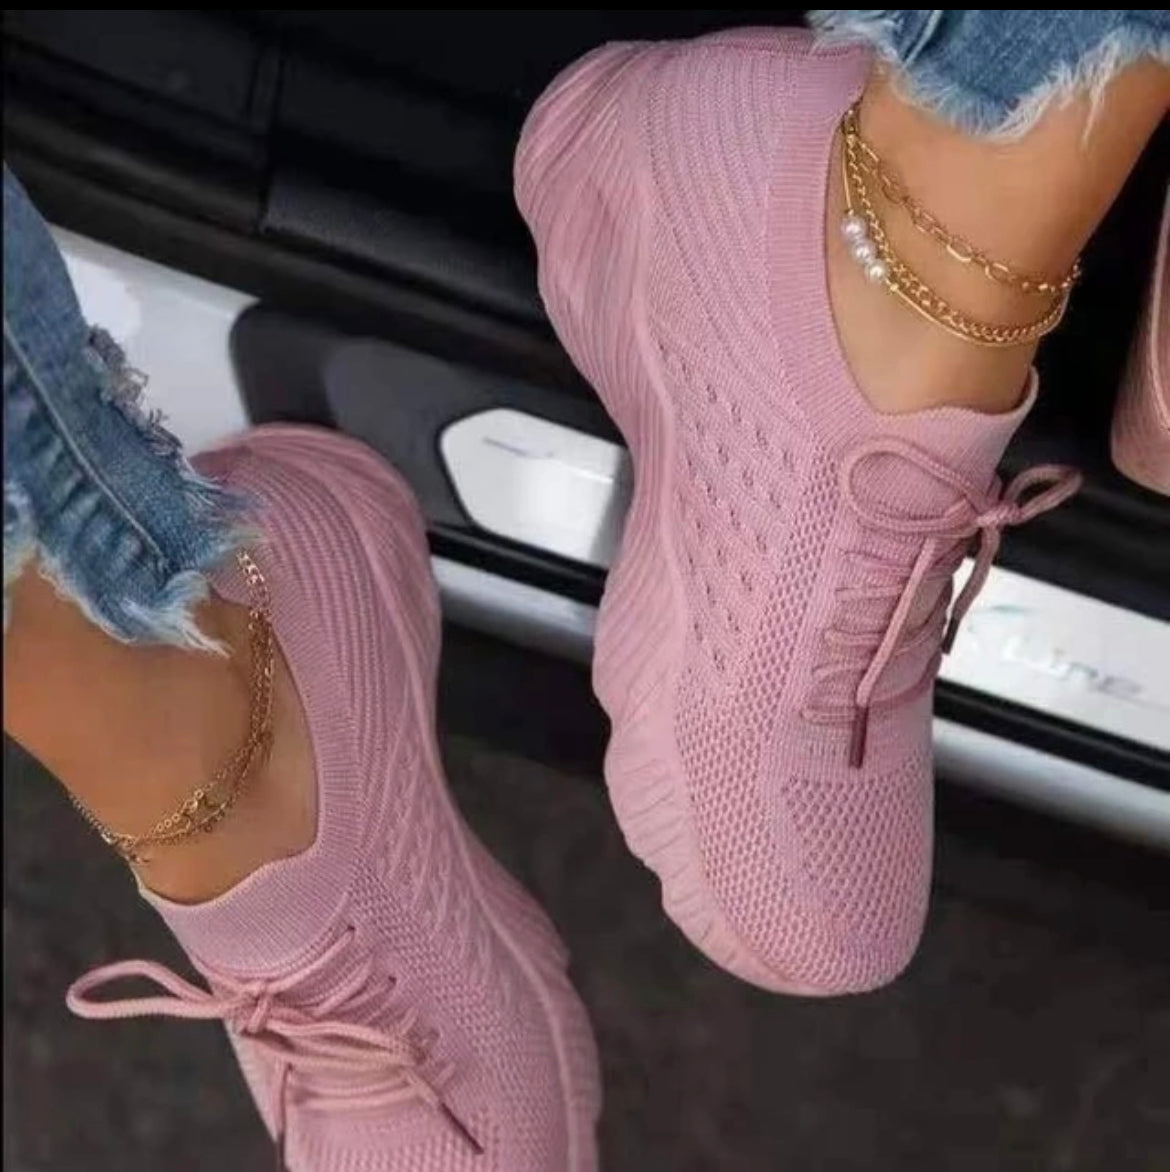 Women’s Fashion Sneakers - Lace Up, Platform Shoes - Pink - Free Delivery